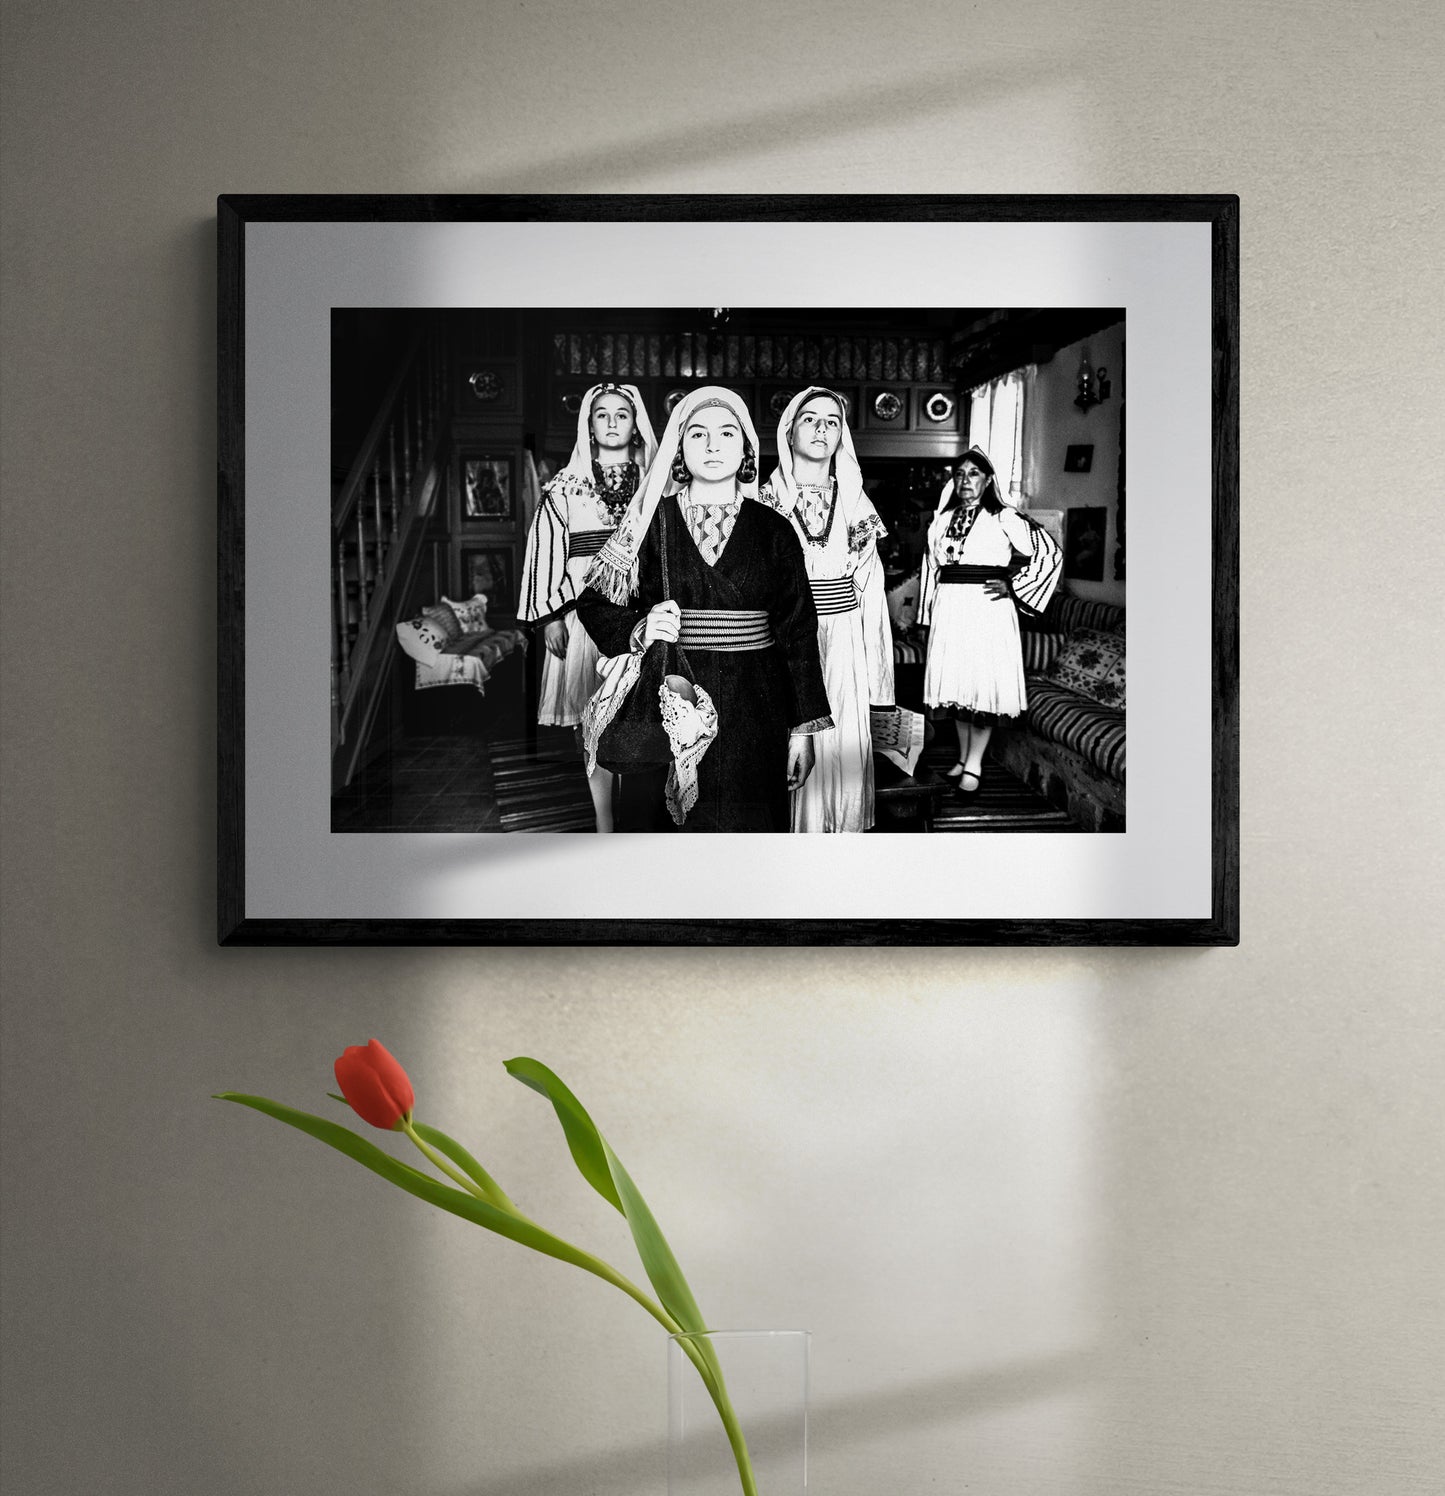 Black and White Photography Wall Art Greece | Costumes of Tilos island inside a traditional home Dodecanese Greece by George Tatakis - single framed photo